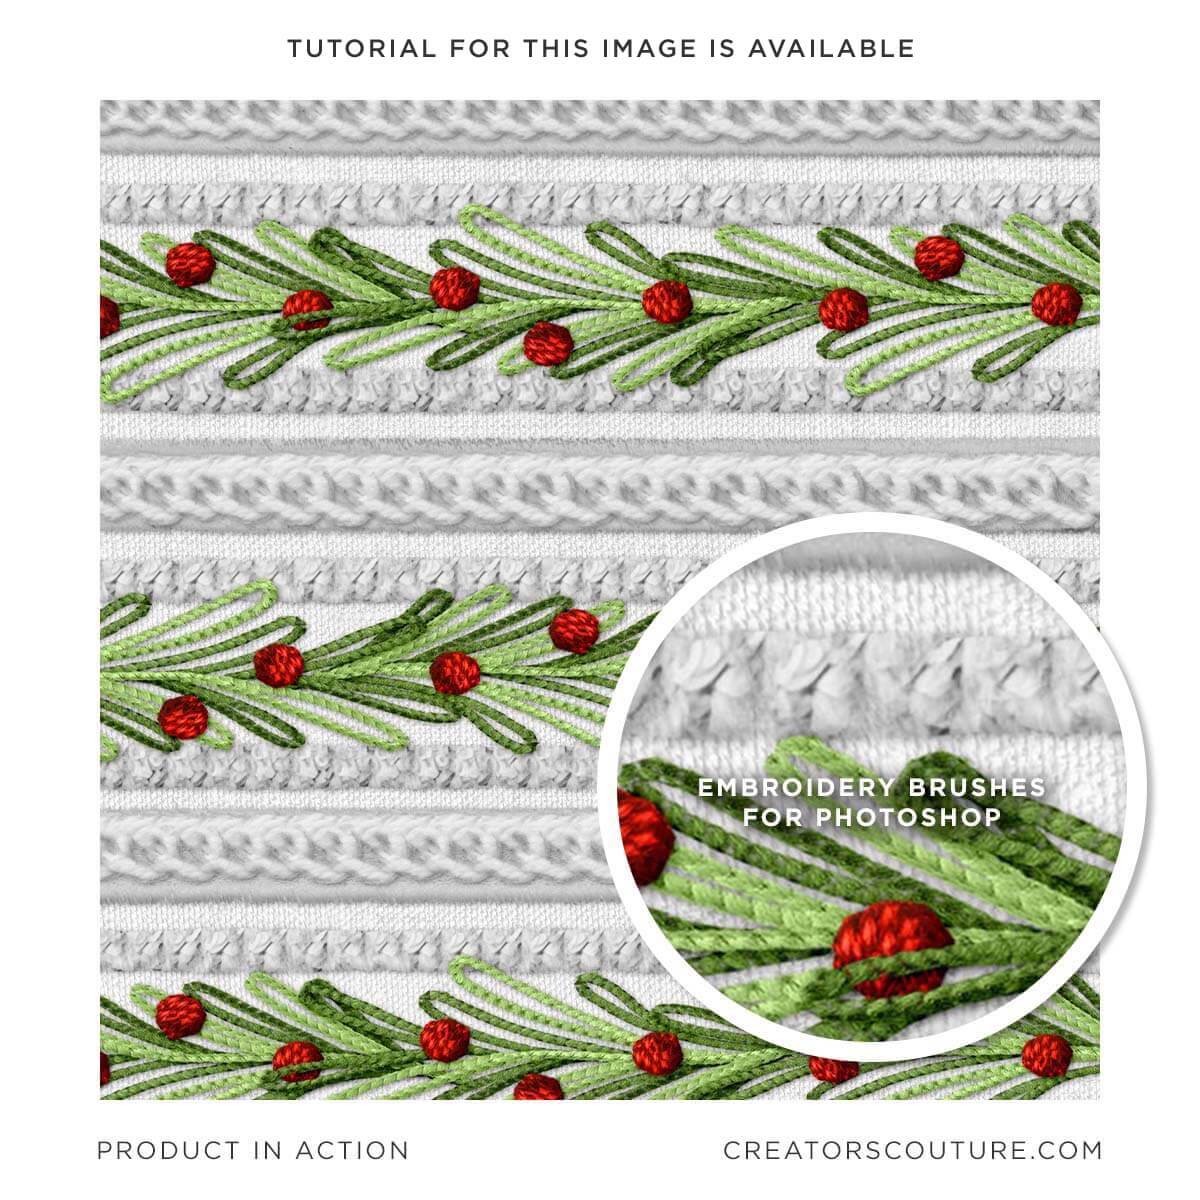 Surface pattern design sample created in an embroidery effect, made with Photoshop brushes. Embroidery style holiday greenery illustration over a white embroidered background, realistic, 3-D embroidery effect. 